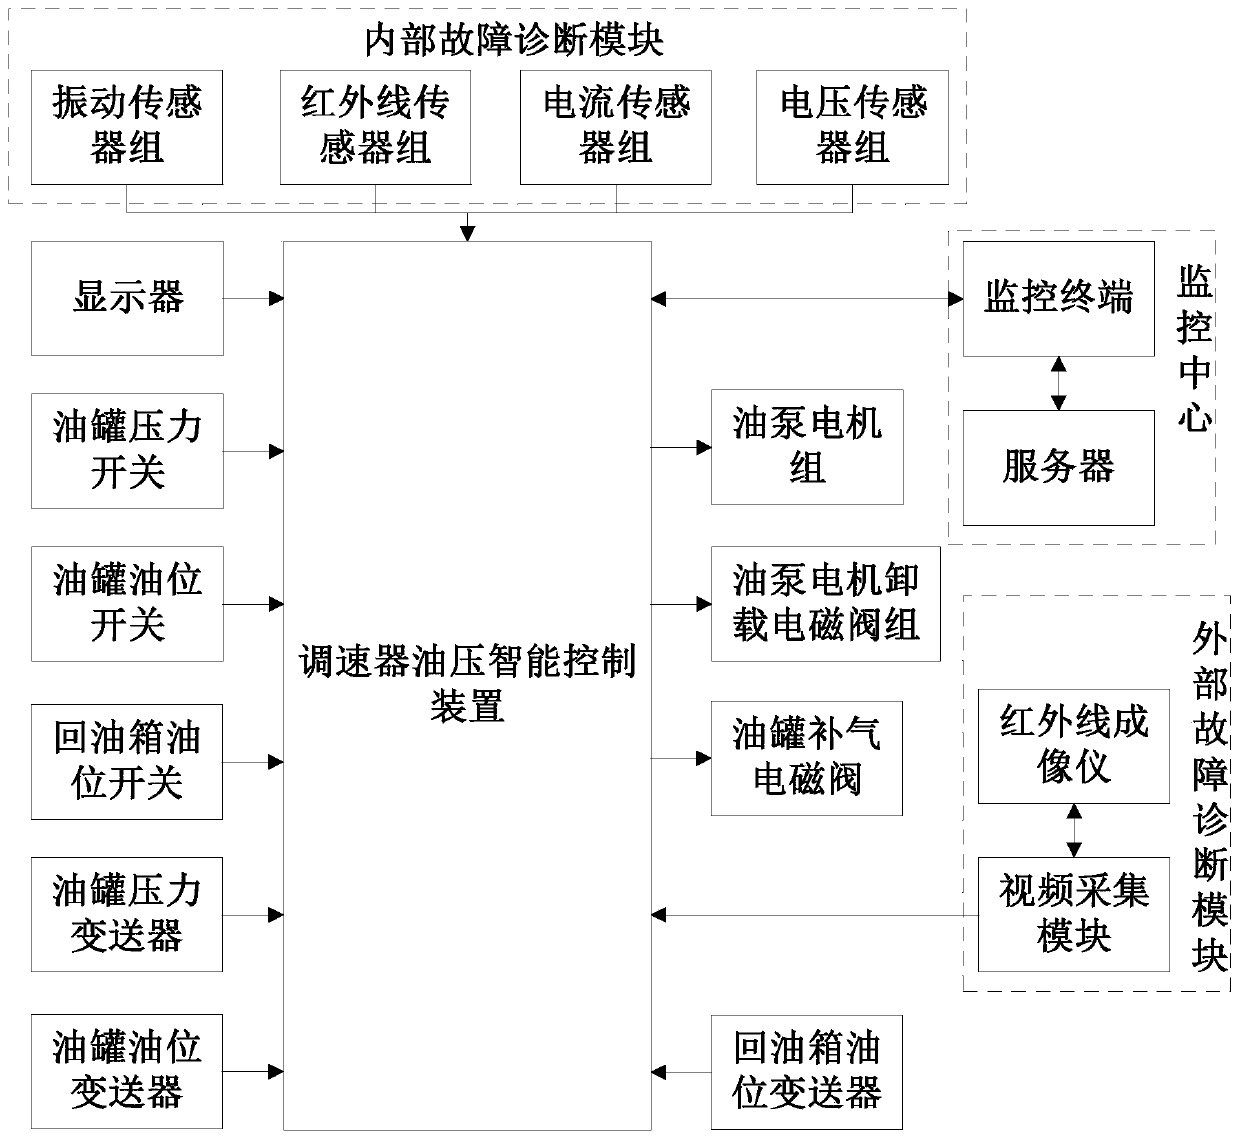 Fault Diagnosis Oil Pressure Intelligent Control System and Diagnosis Method of Hydropower Station Governor